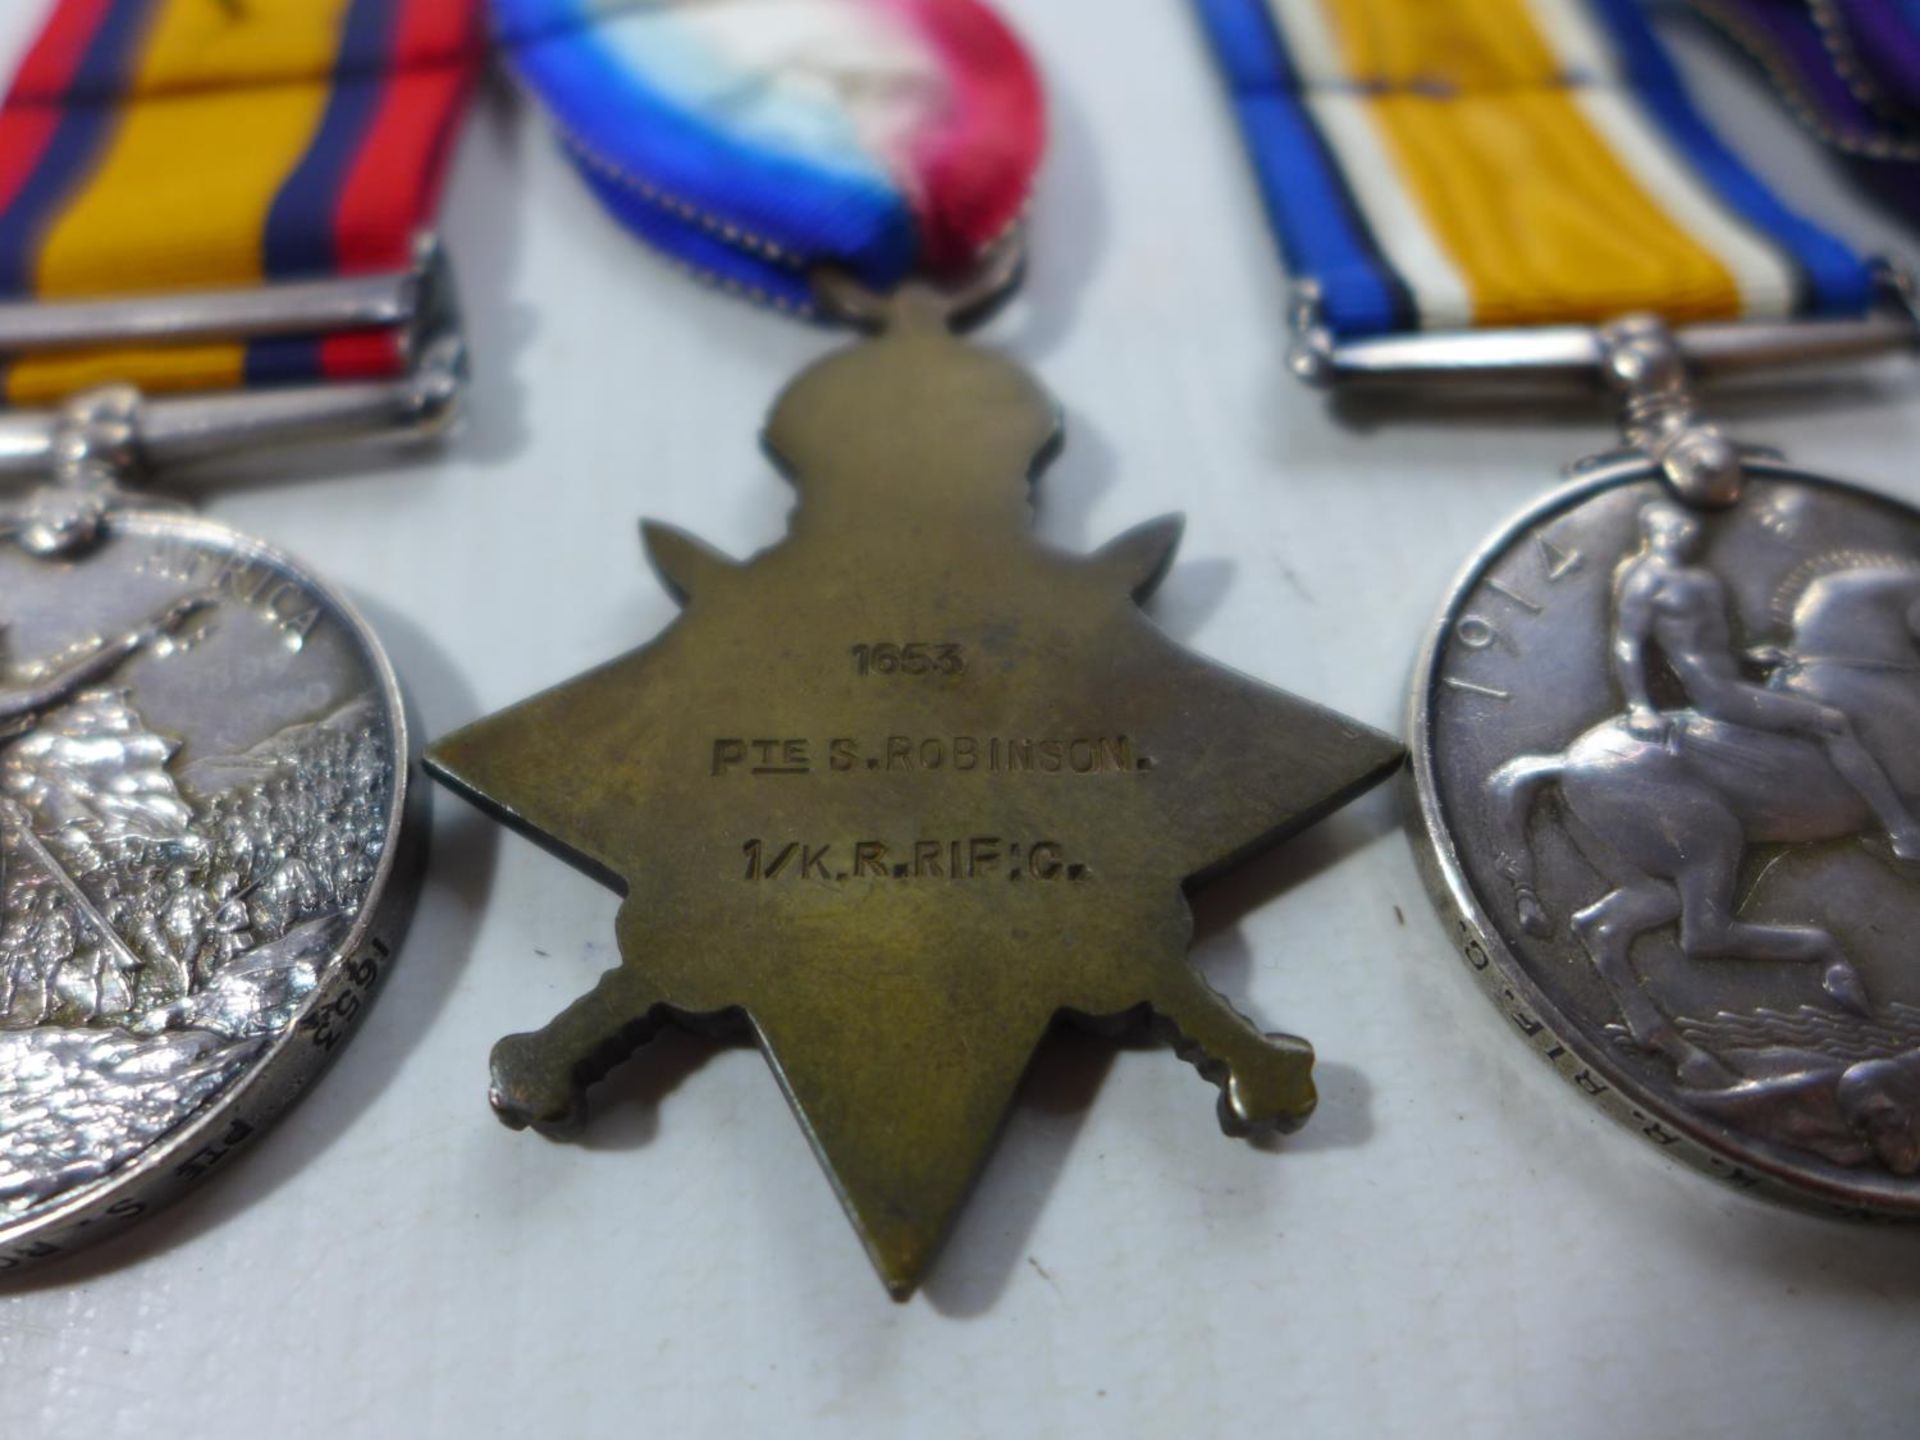 A BOER WAR AND WORLD WAR I CASUALTY MEDAL GROUP AWARDED TO 1653 PRIVATE SIMEON ROBINSON OF THE KINGS - Image 4 of 5